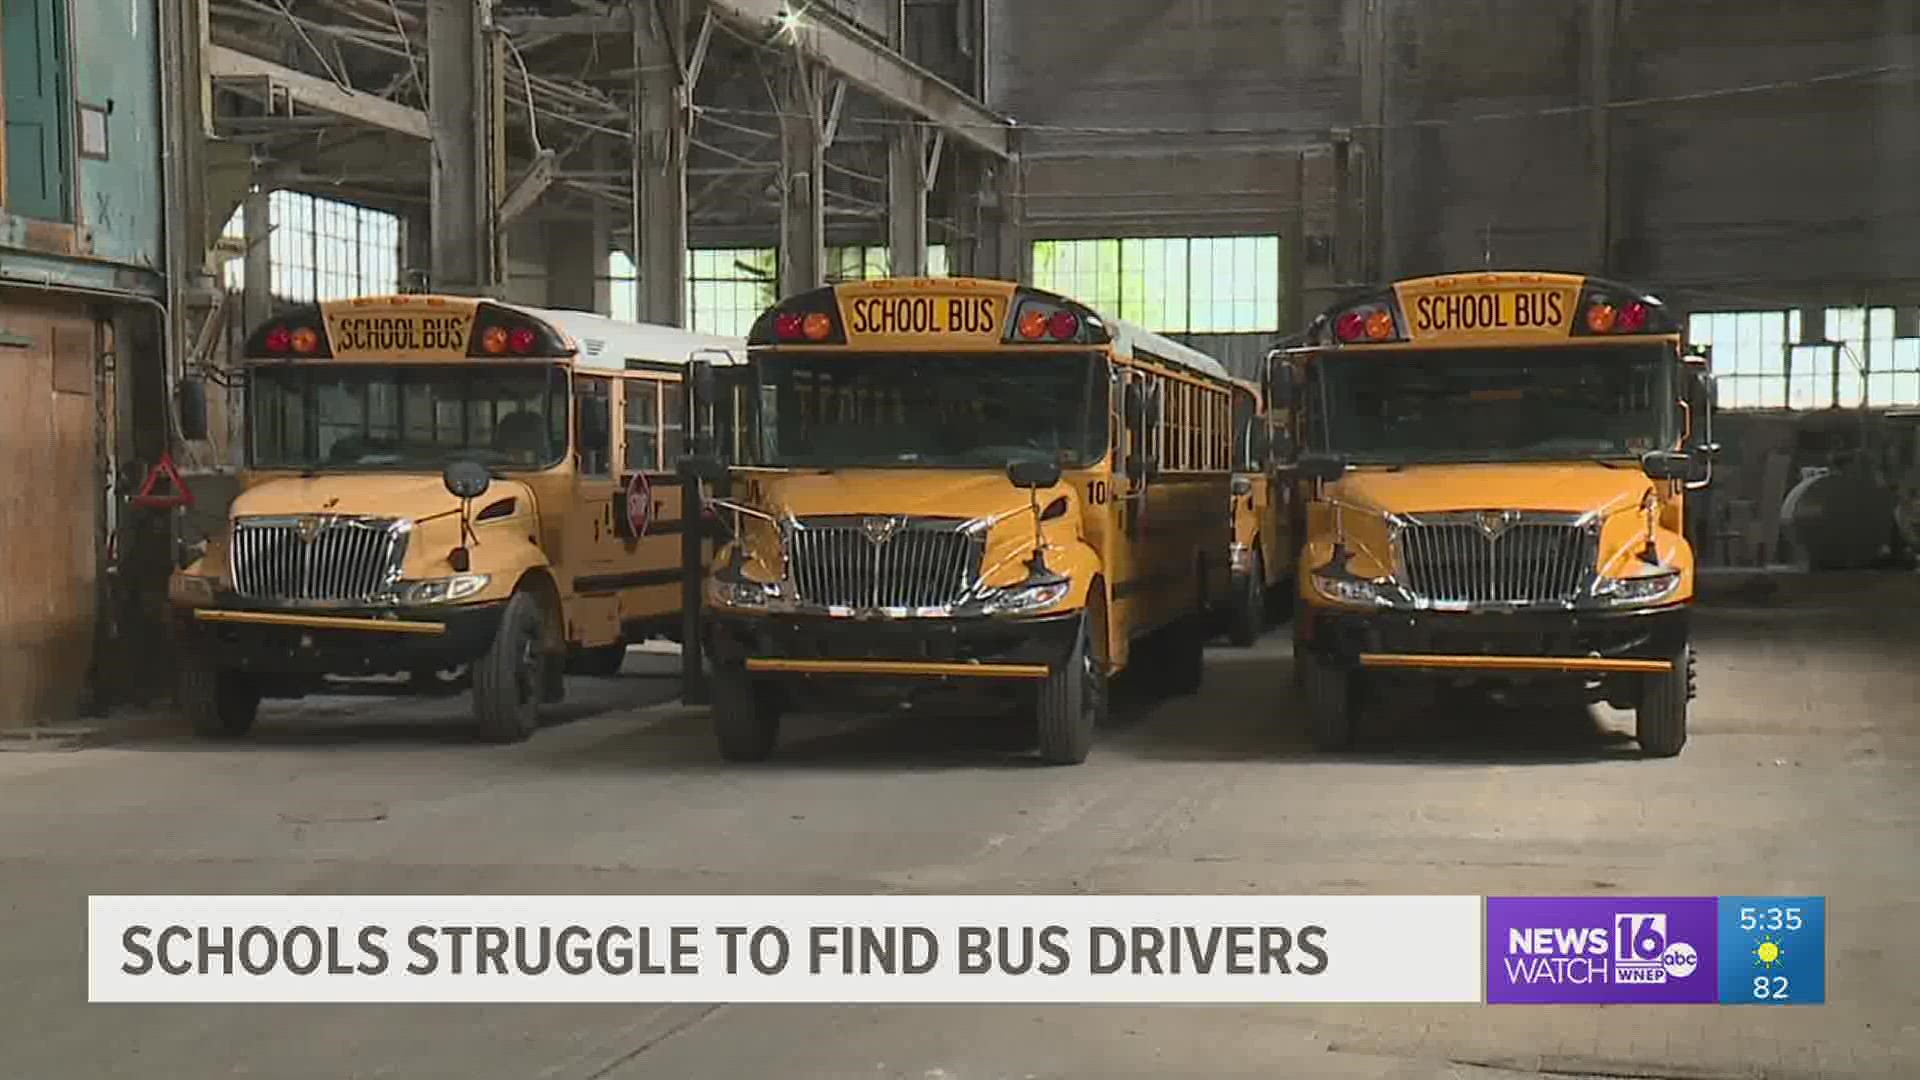 Bus companies say driver shortage has been a problem for years, the pandemic made it worse.